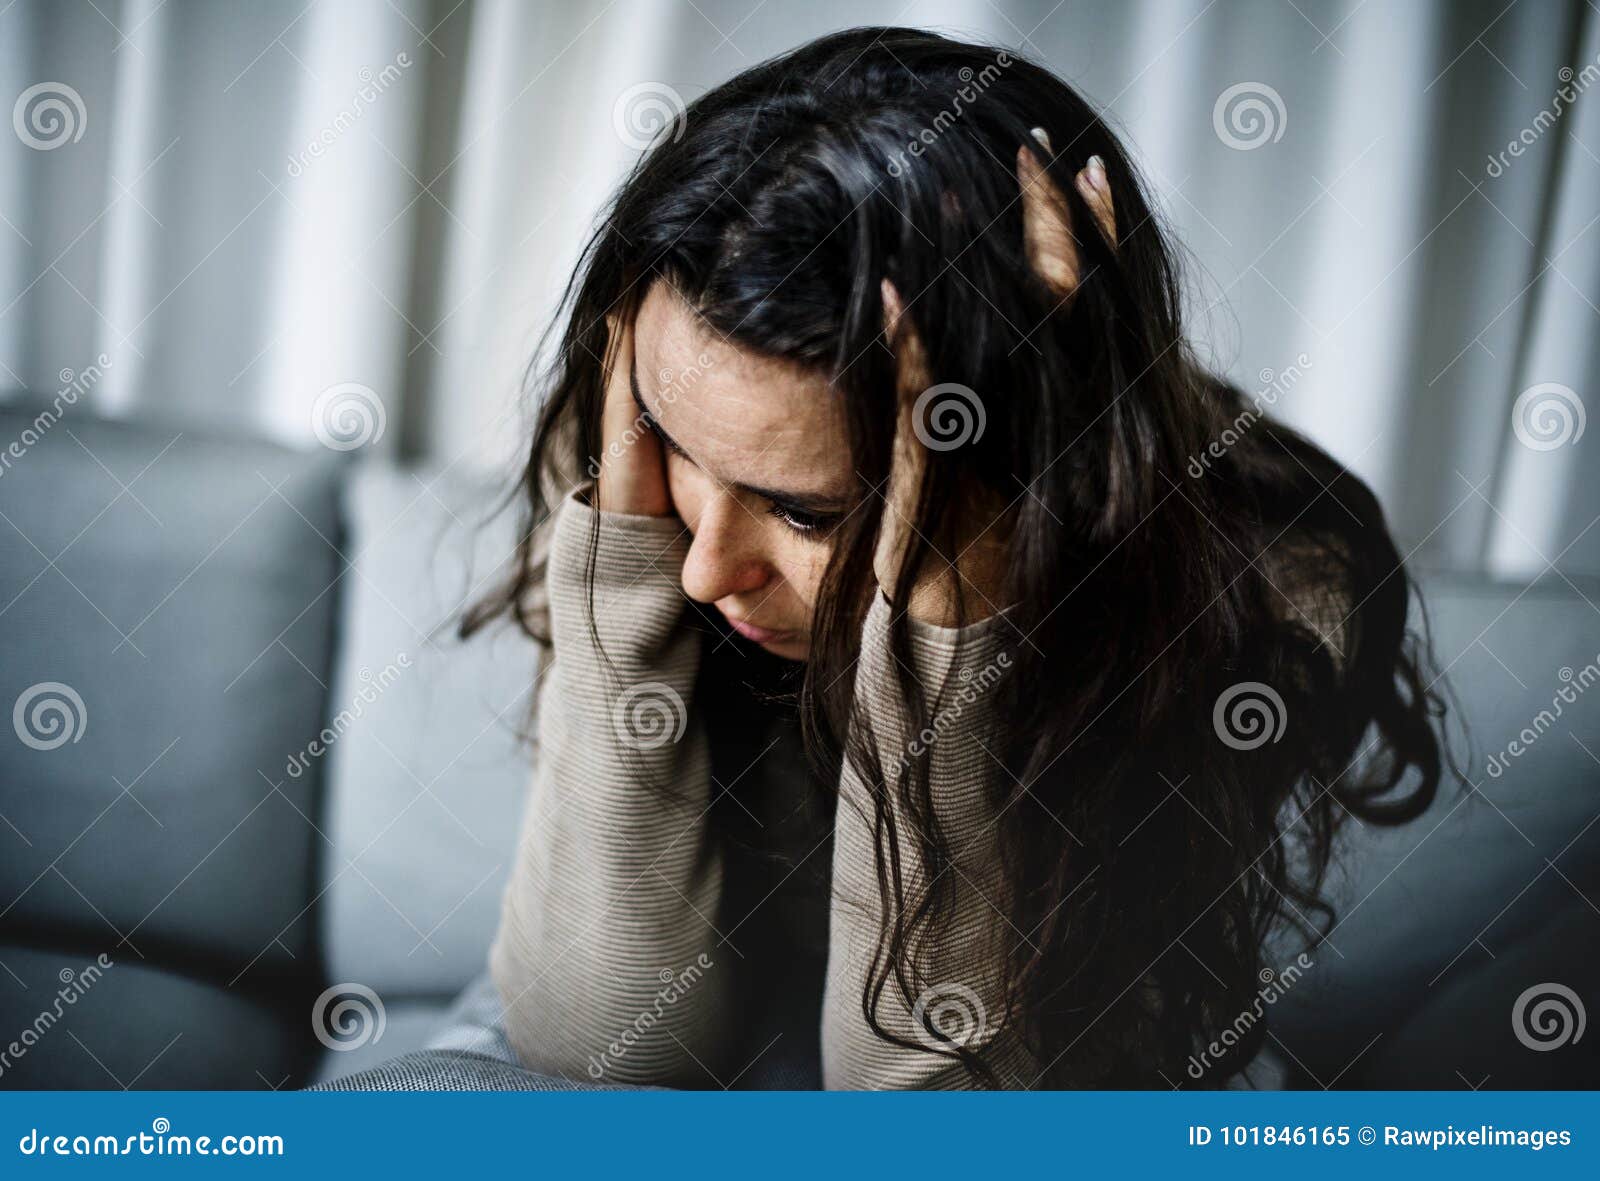 depressed woman having a counseling session